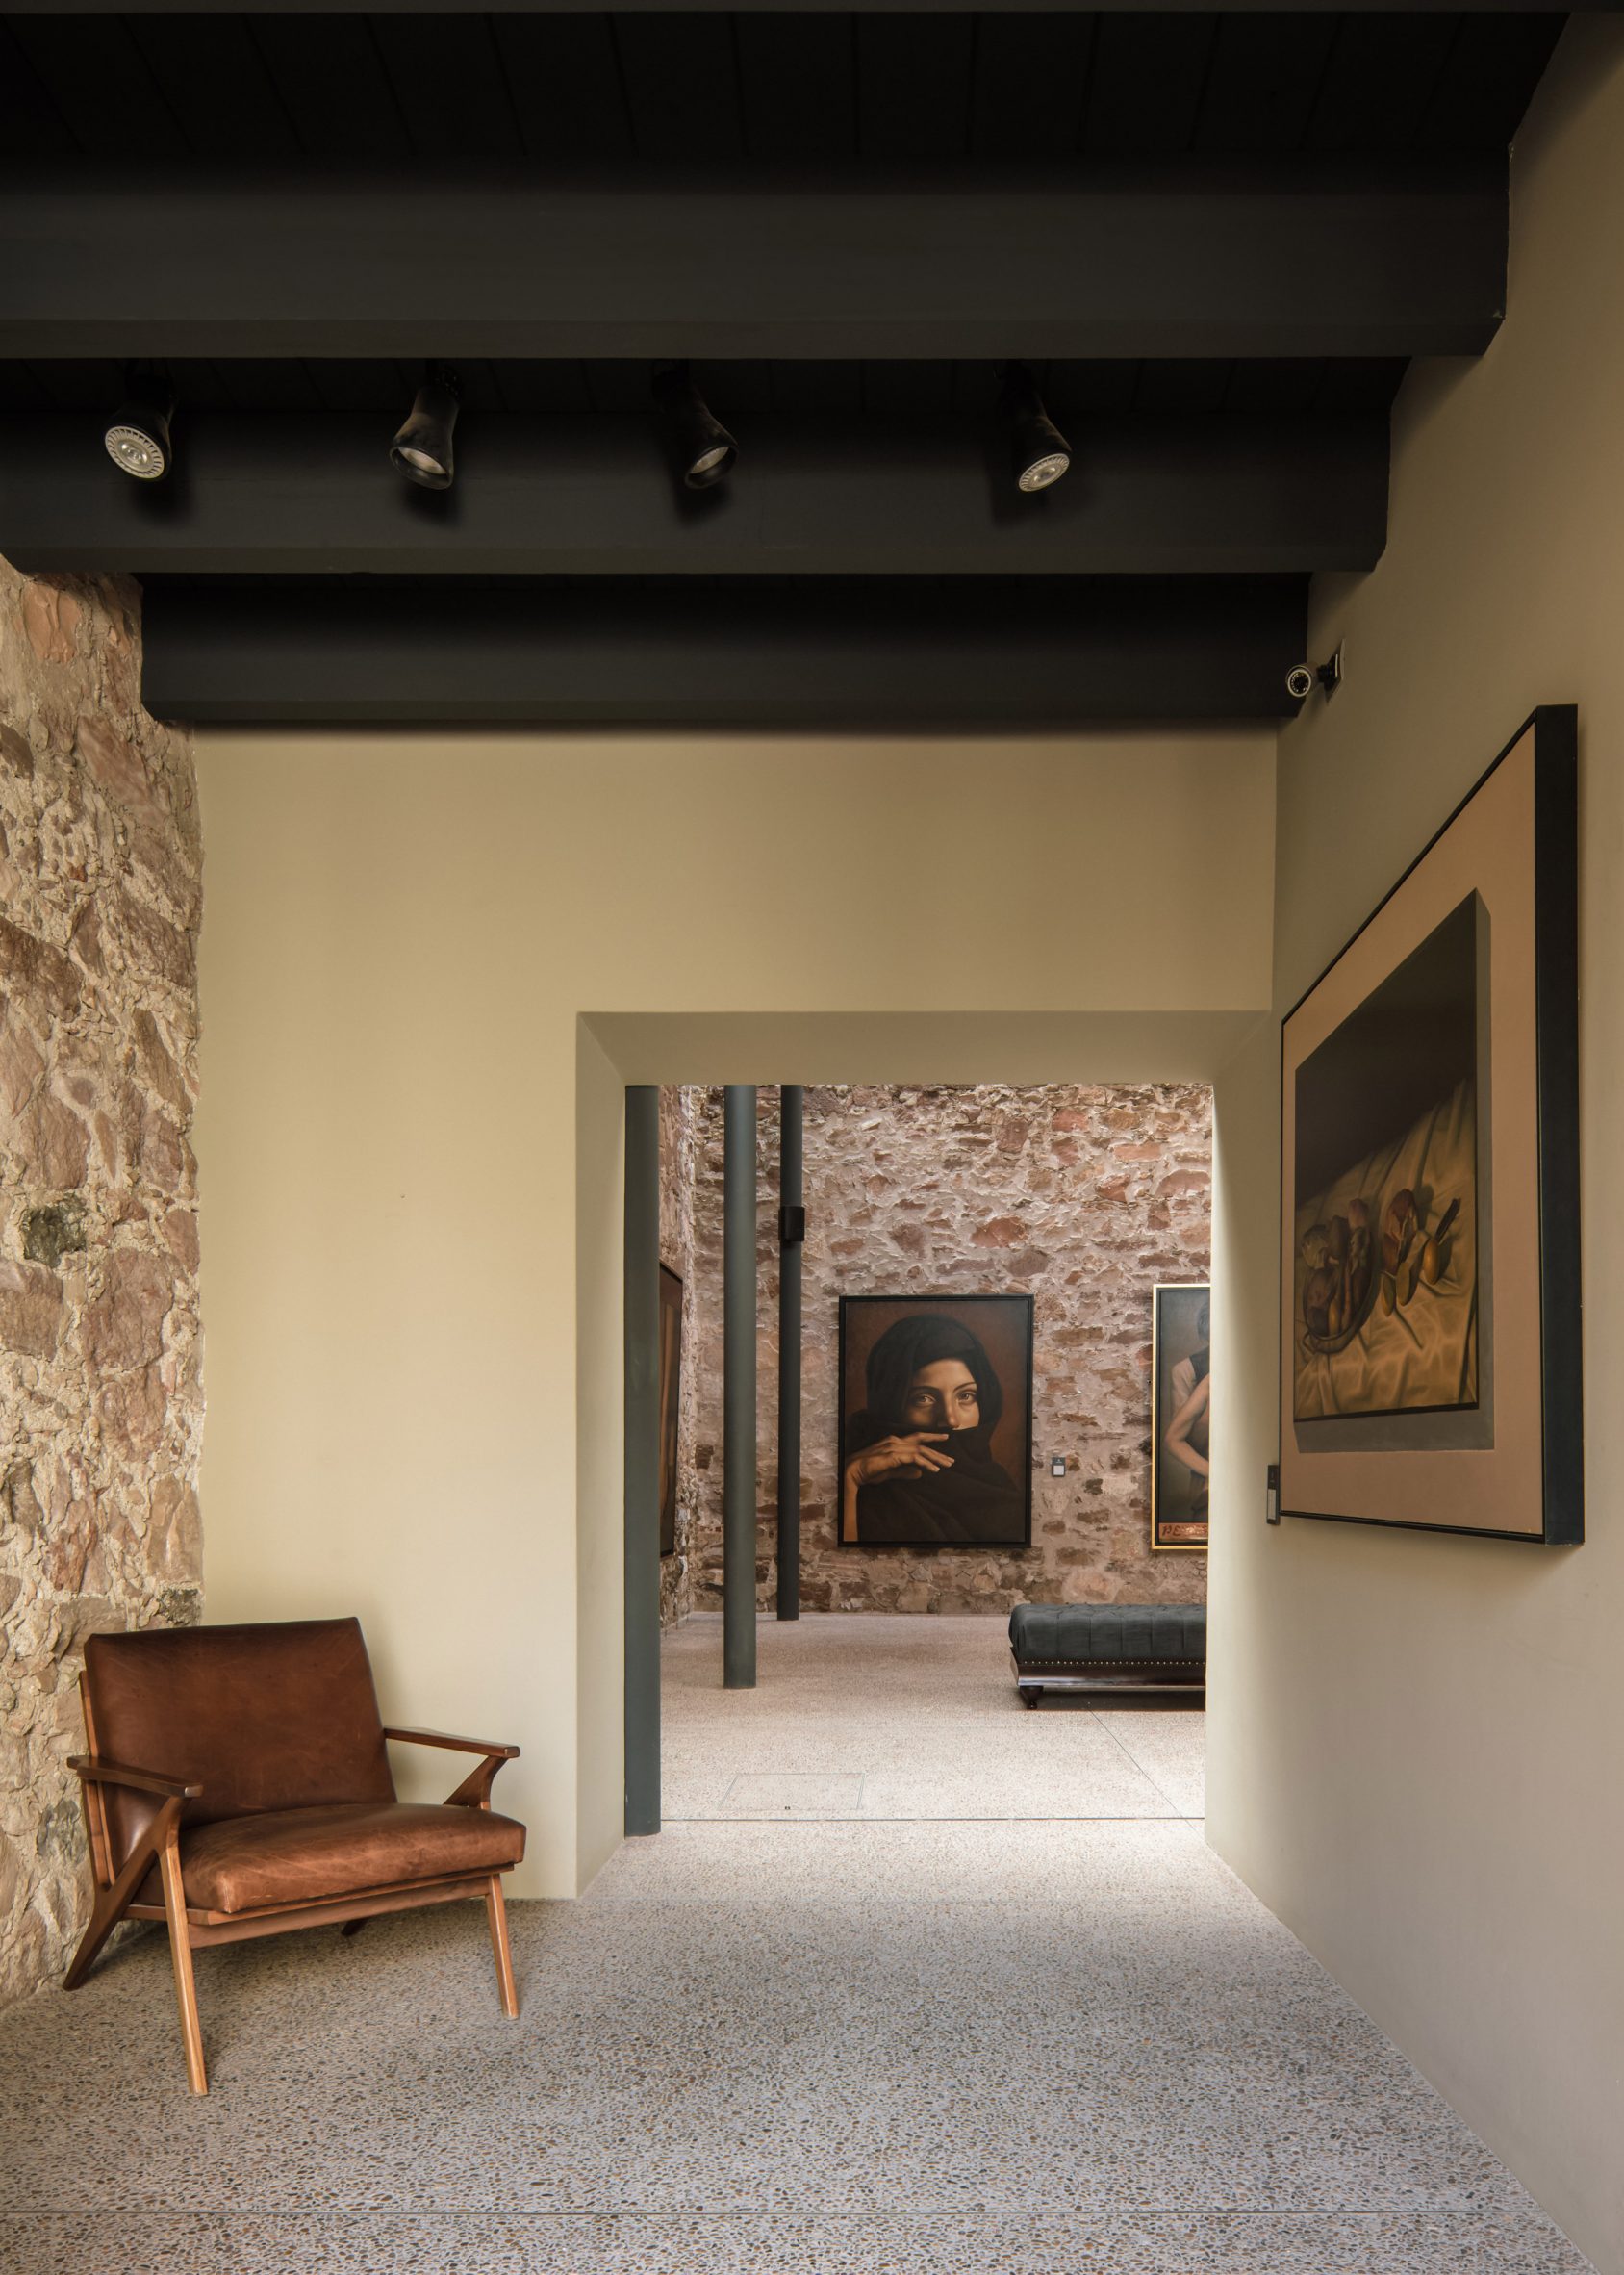 Exposed stone and leather chair in gallery